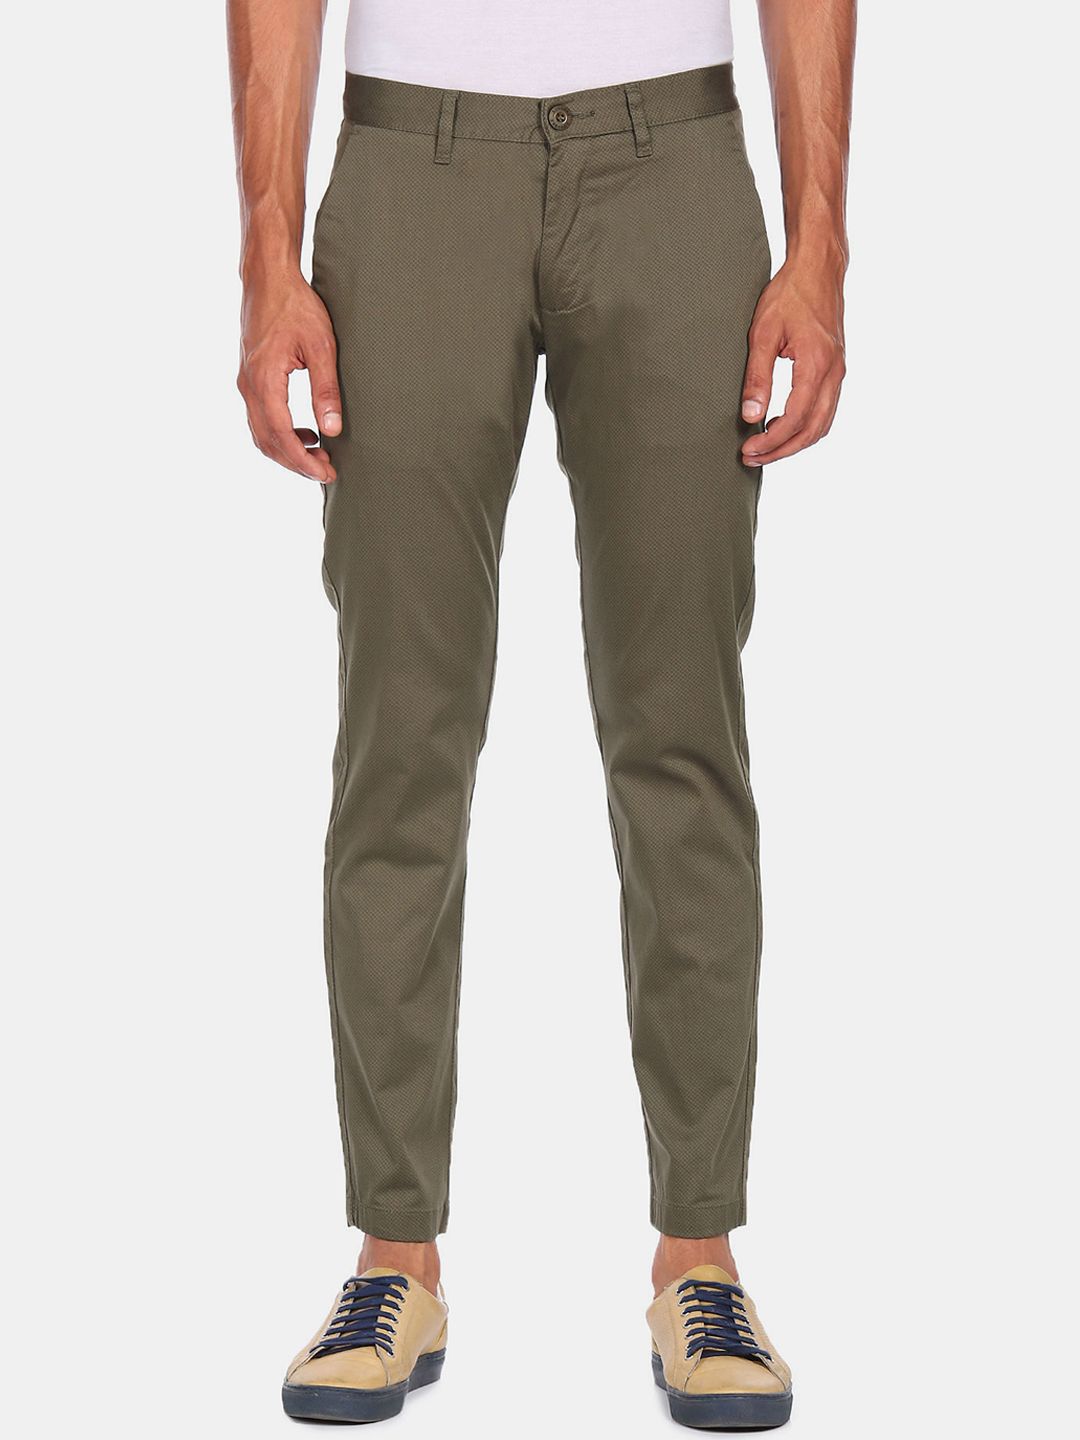 Roots by Ruggers Slim Fit Men Beige Trousers  Buy KHAKI Roots by Ruggers  Slim Fit Men Beige Trousers Online at Best Prices in India  Flipkartcom